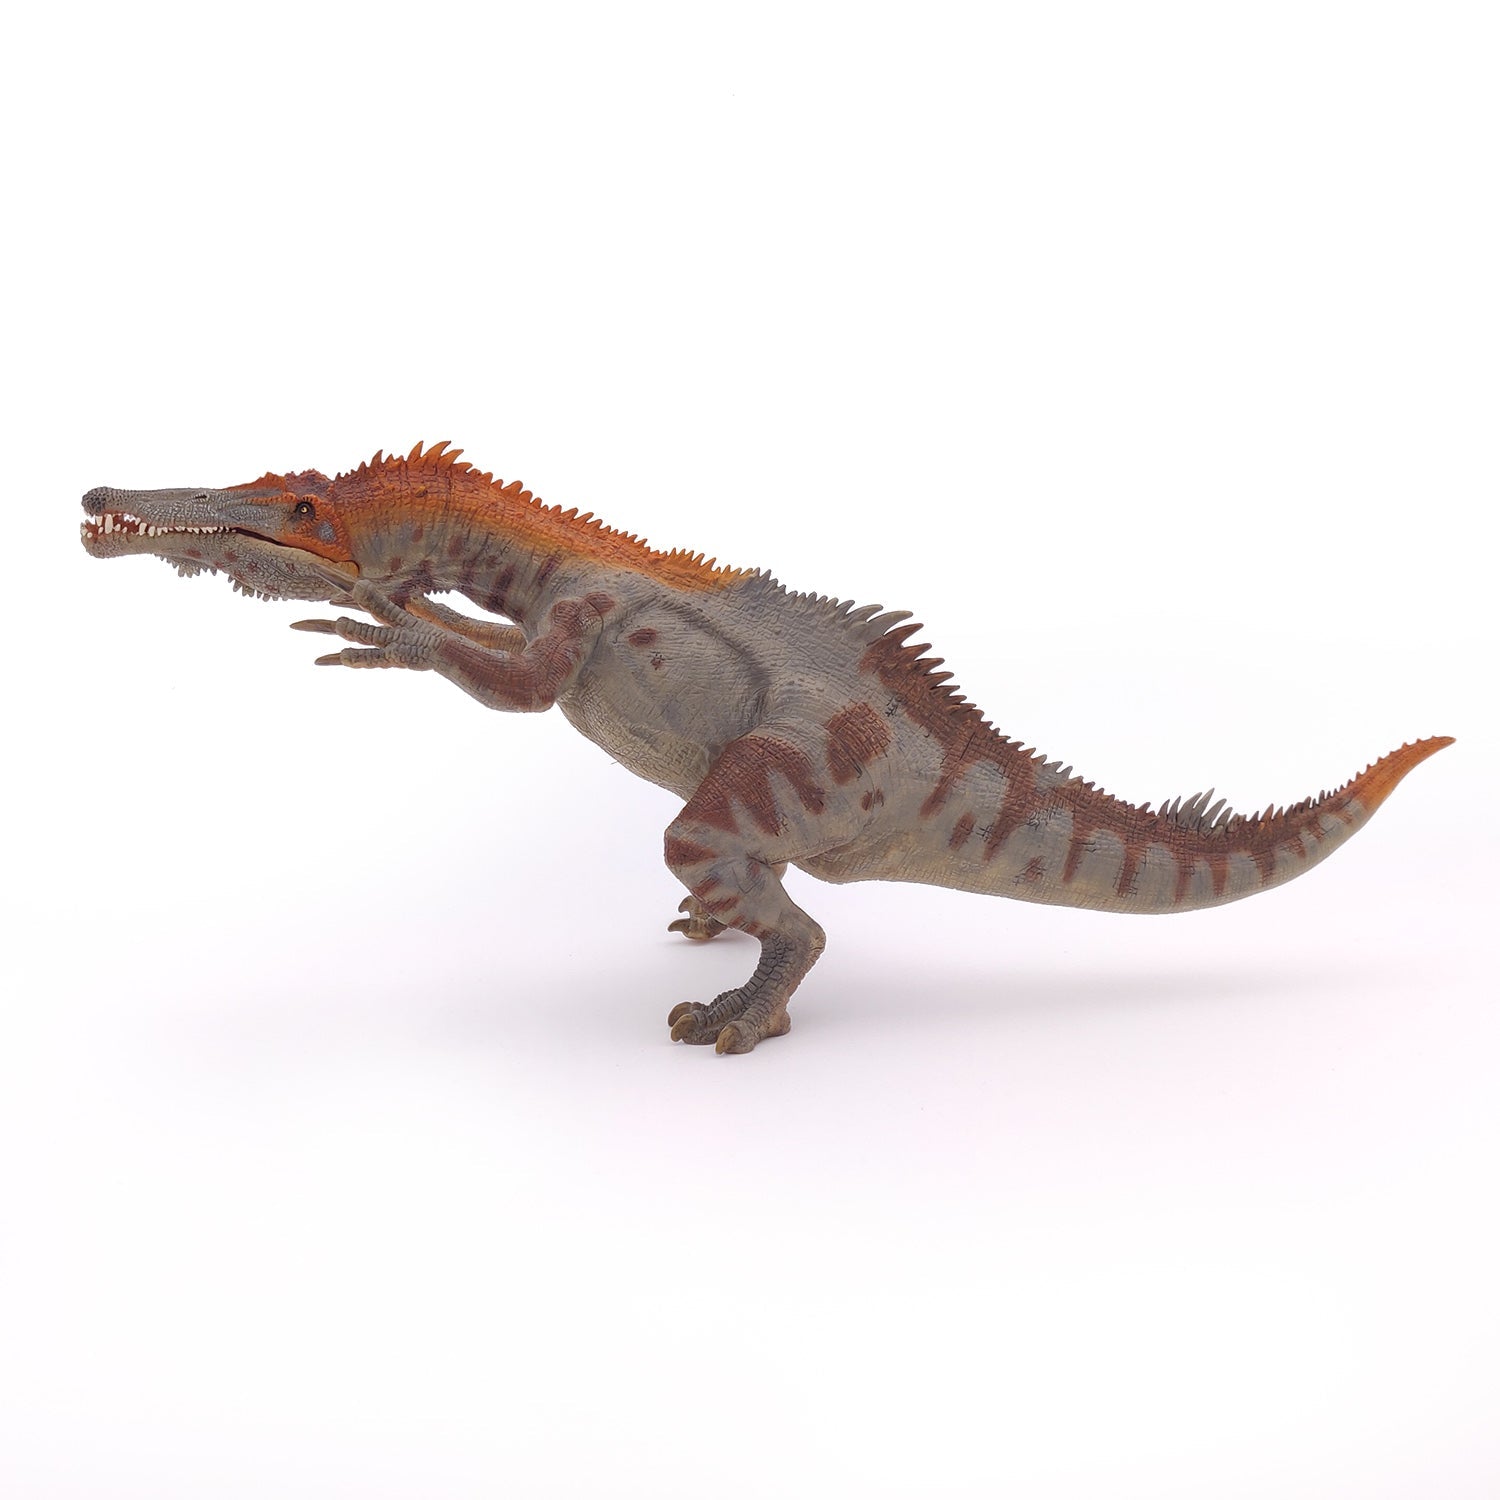 Baryonyx Dinosaur Replica Toy with jaw closed